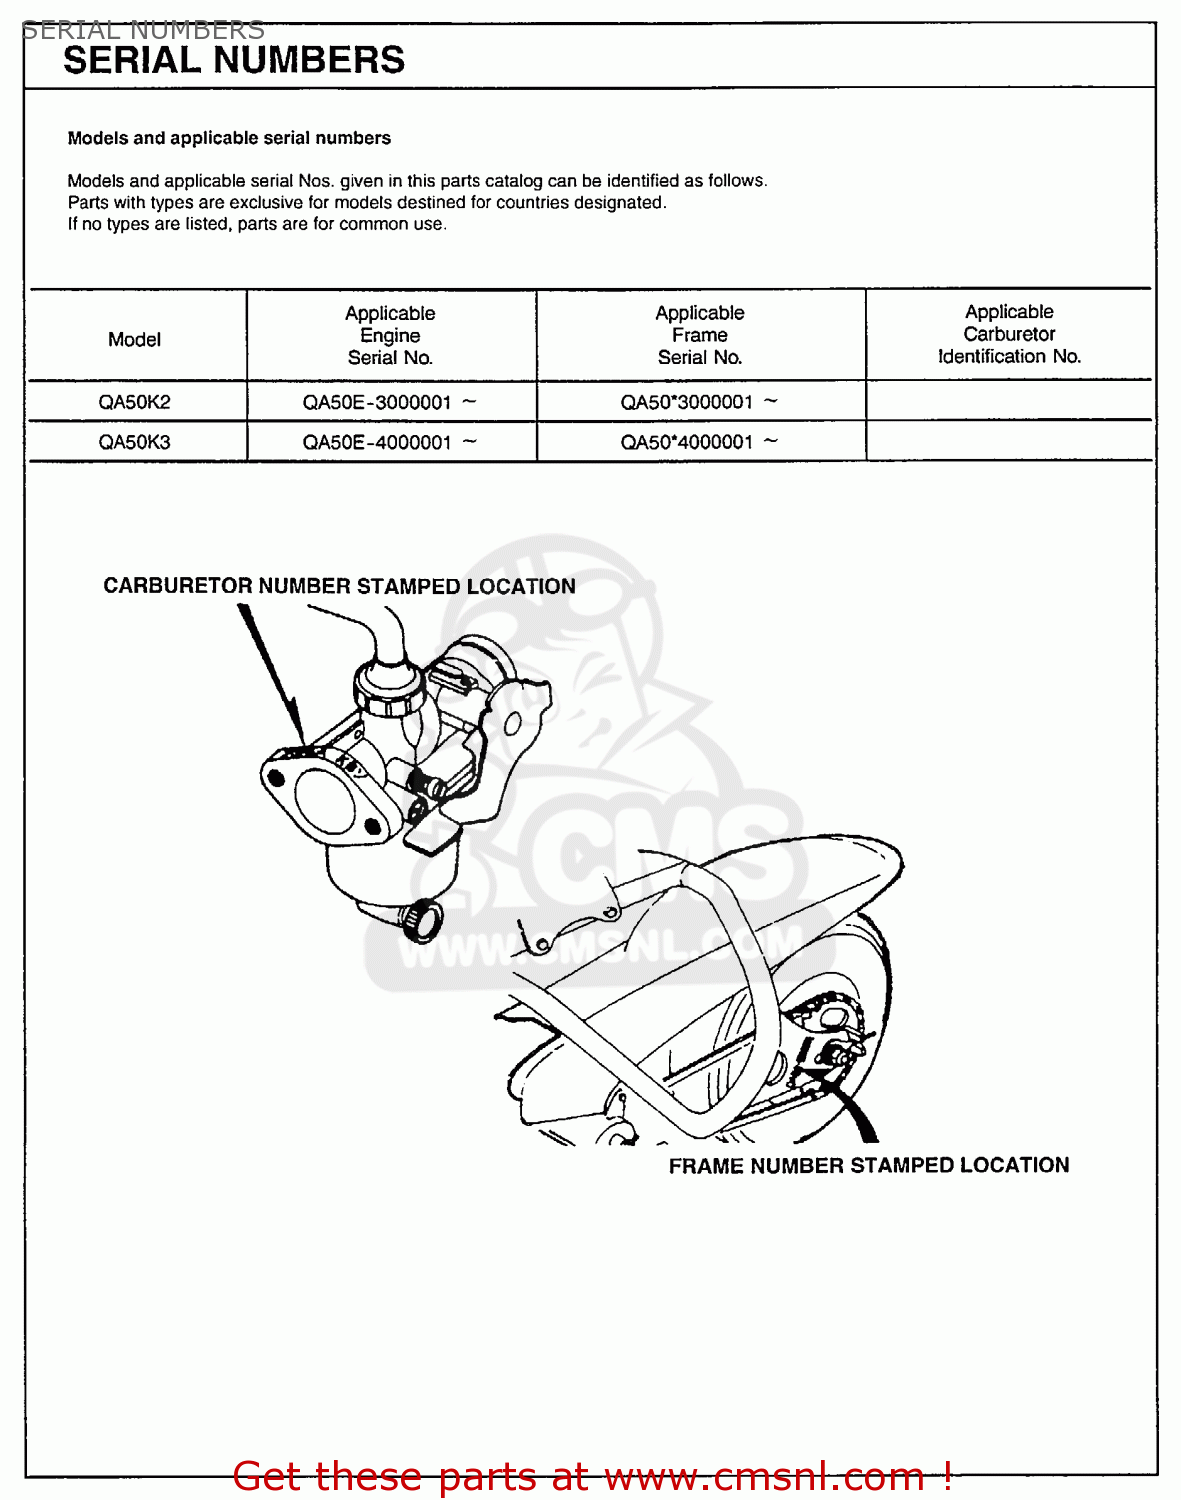 How to determine honda motorcycle year from model number